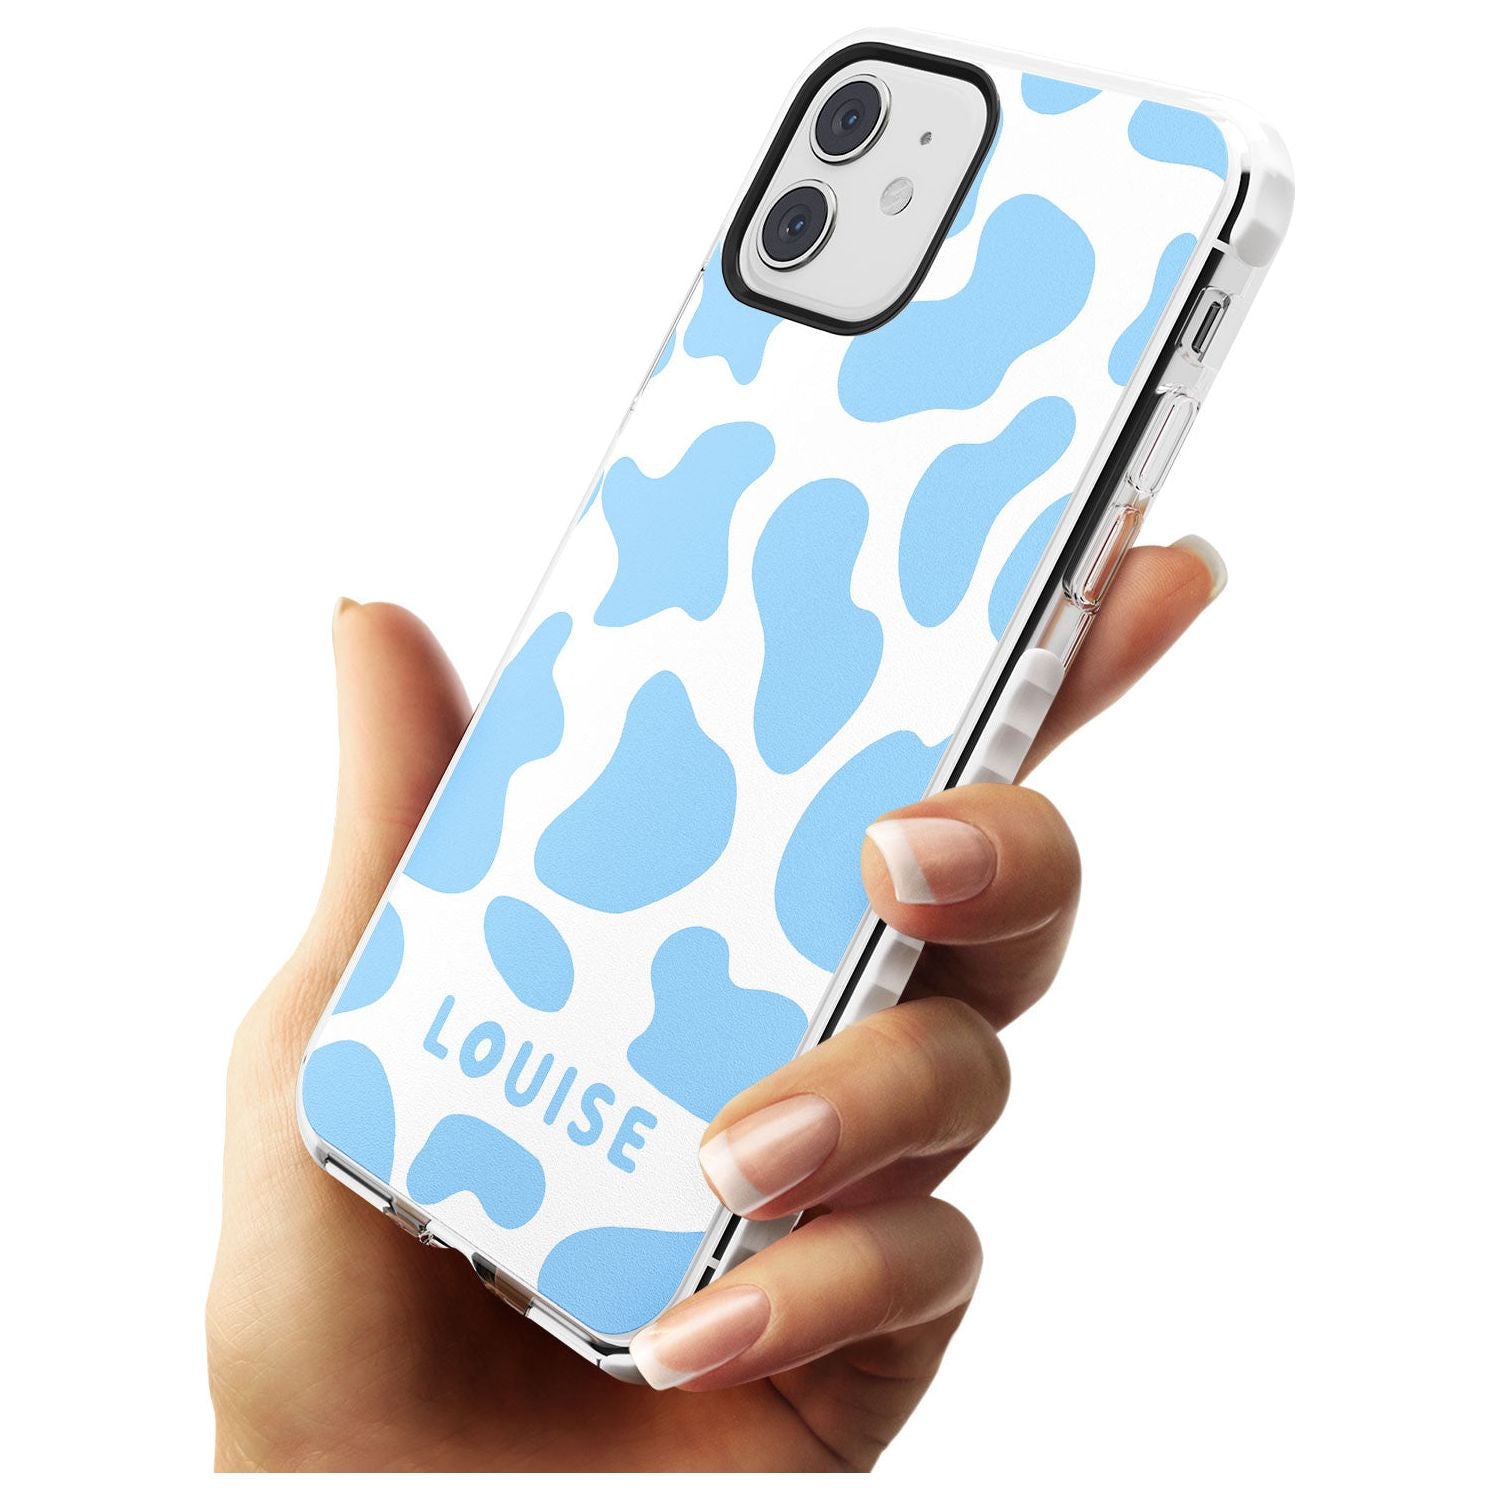 Personalised Blue and White Cow Print Impact Phone Case for iPhone 11